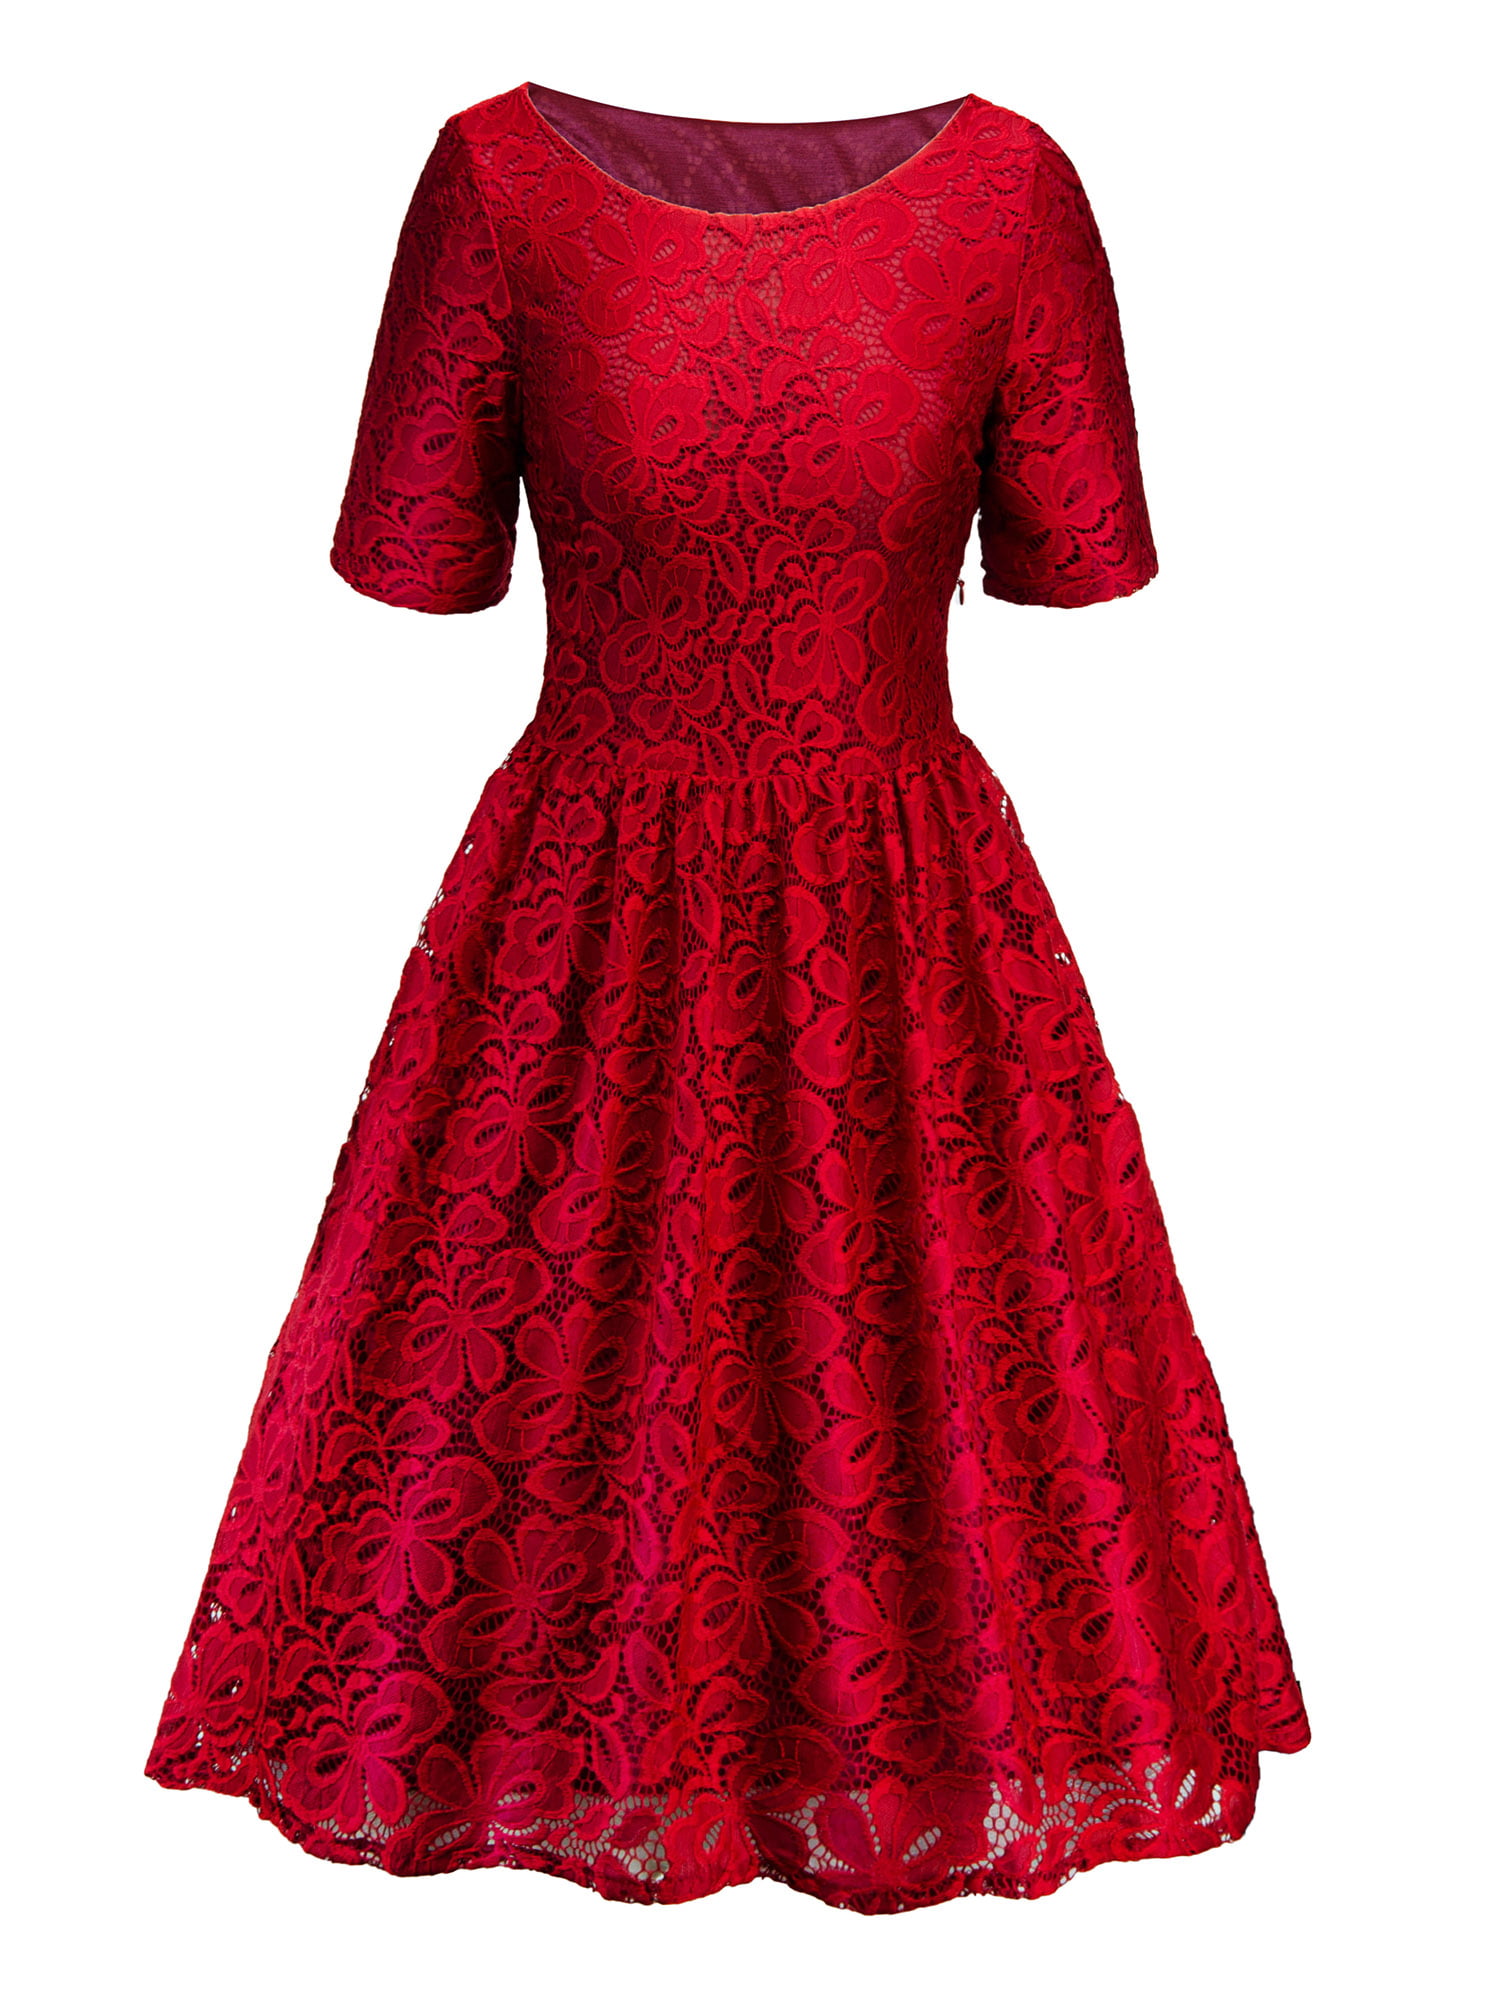 Ever-Beauty Womens Off Shoulder Vintage Floral Lace Cocktail Party Dress 1950s Style Swing Dress